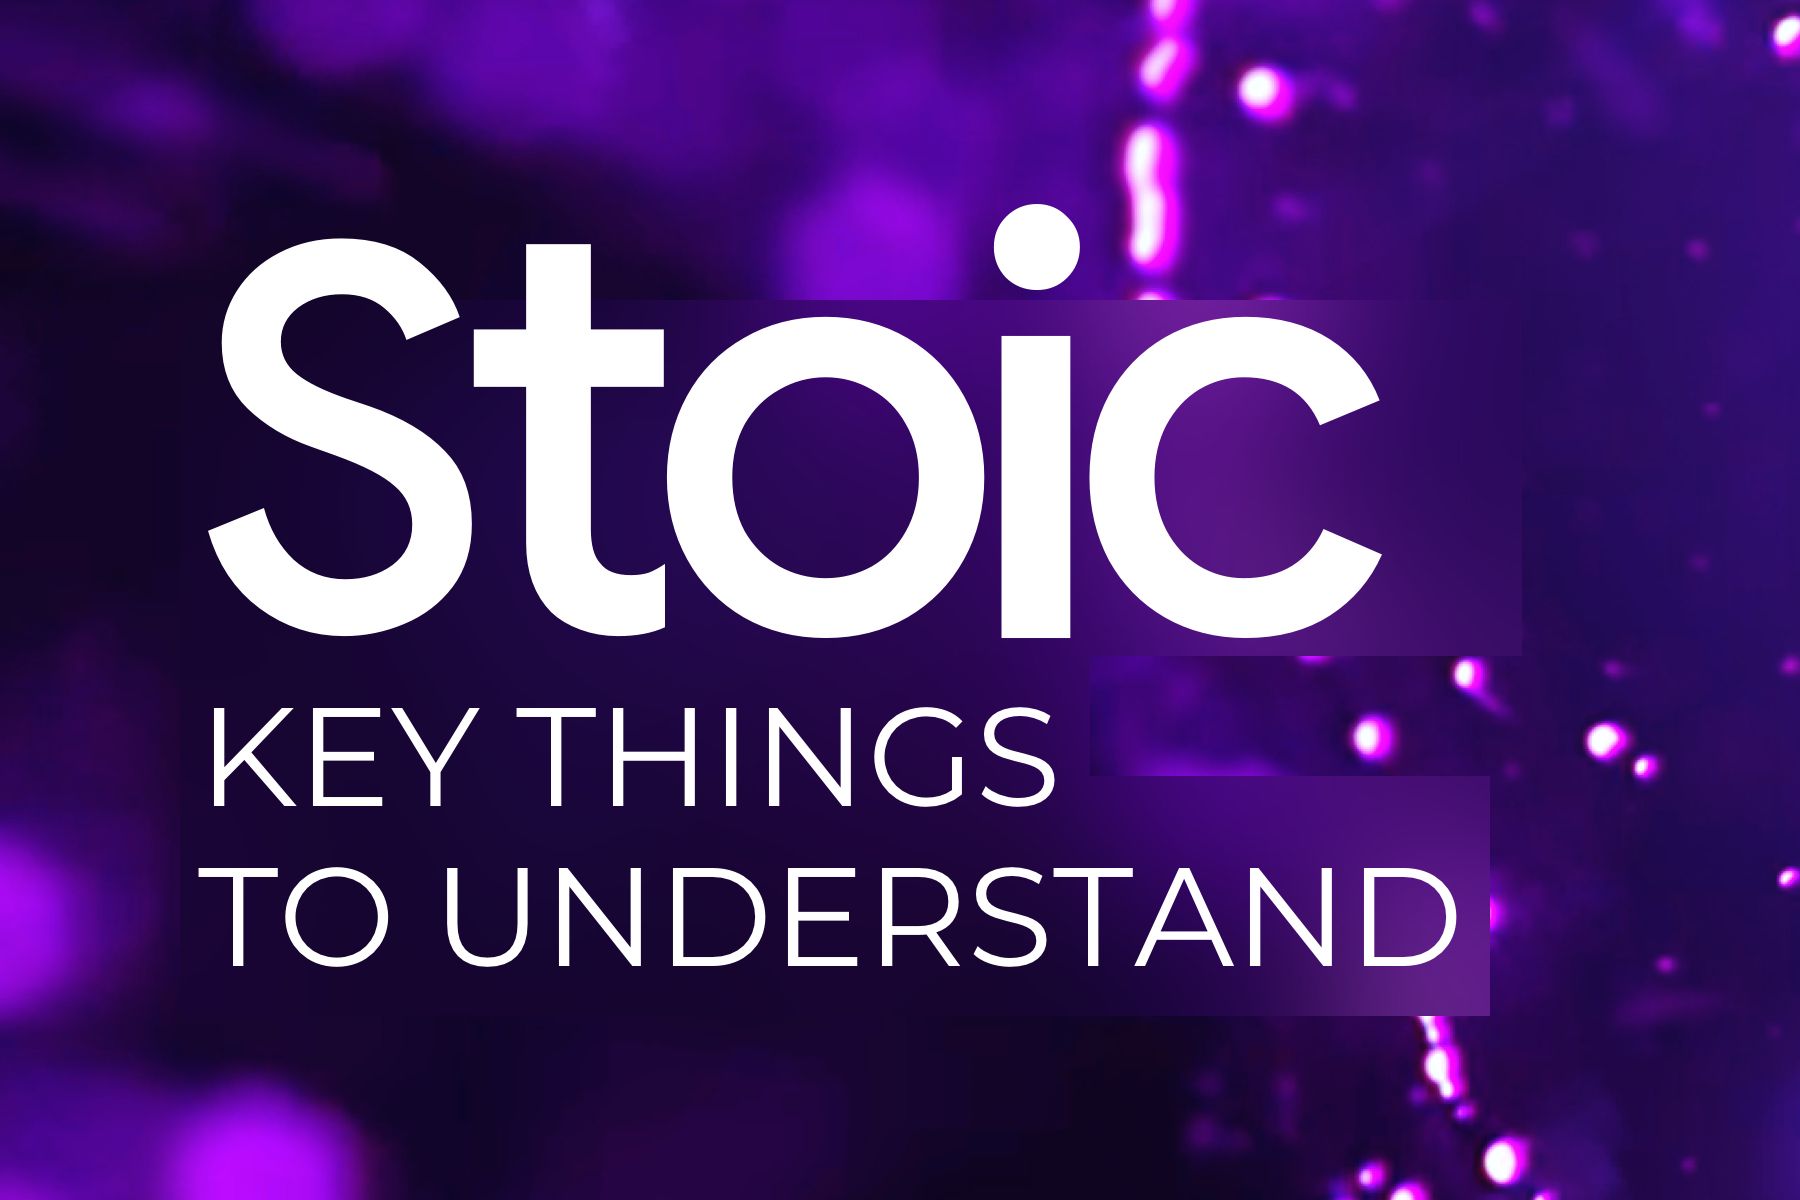 Stoic’s Long-only Strategy: Key Things To Understand